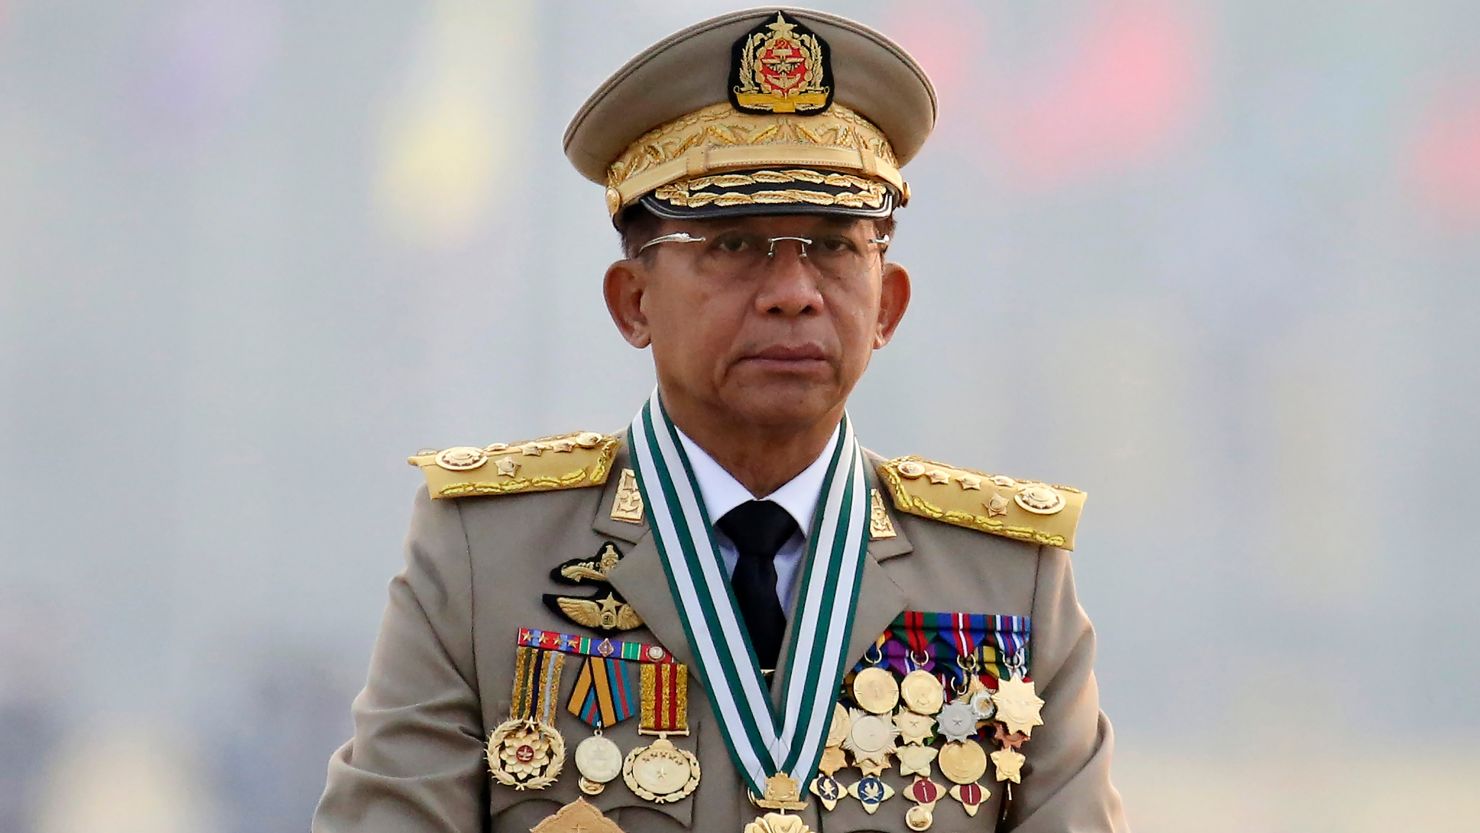 Myanmar's junta chief Min Aung Hlaing presides over a military parade on Armed Forces Day in Naypyidaw, Myanmar on March 27.